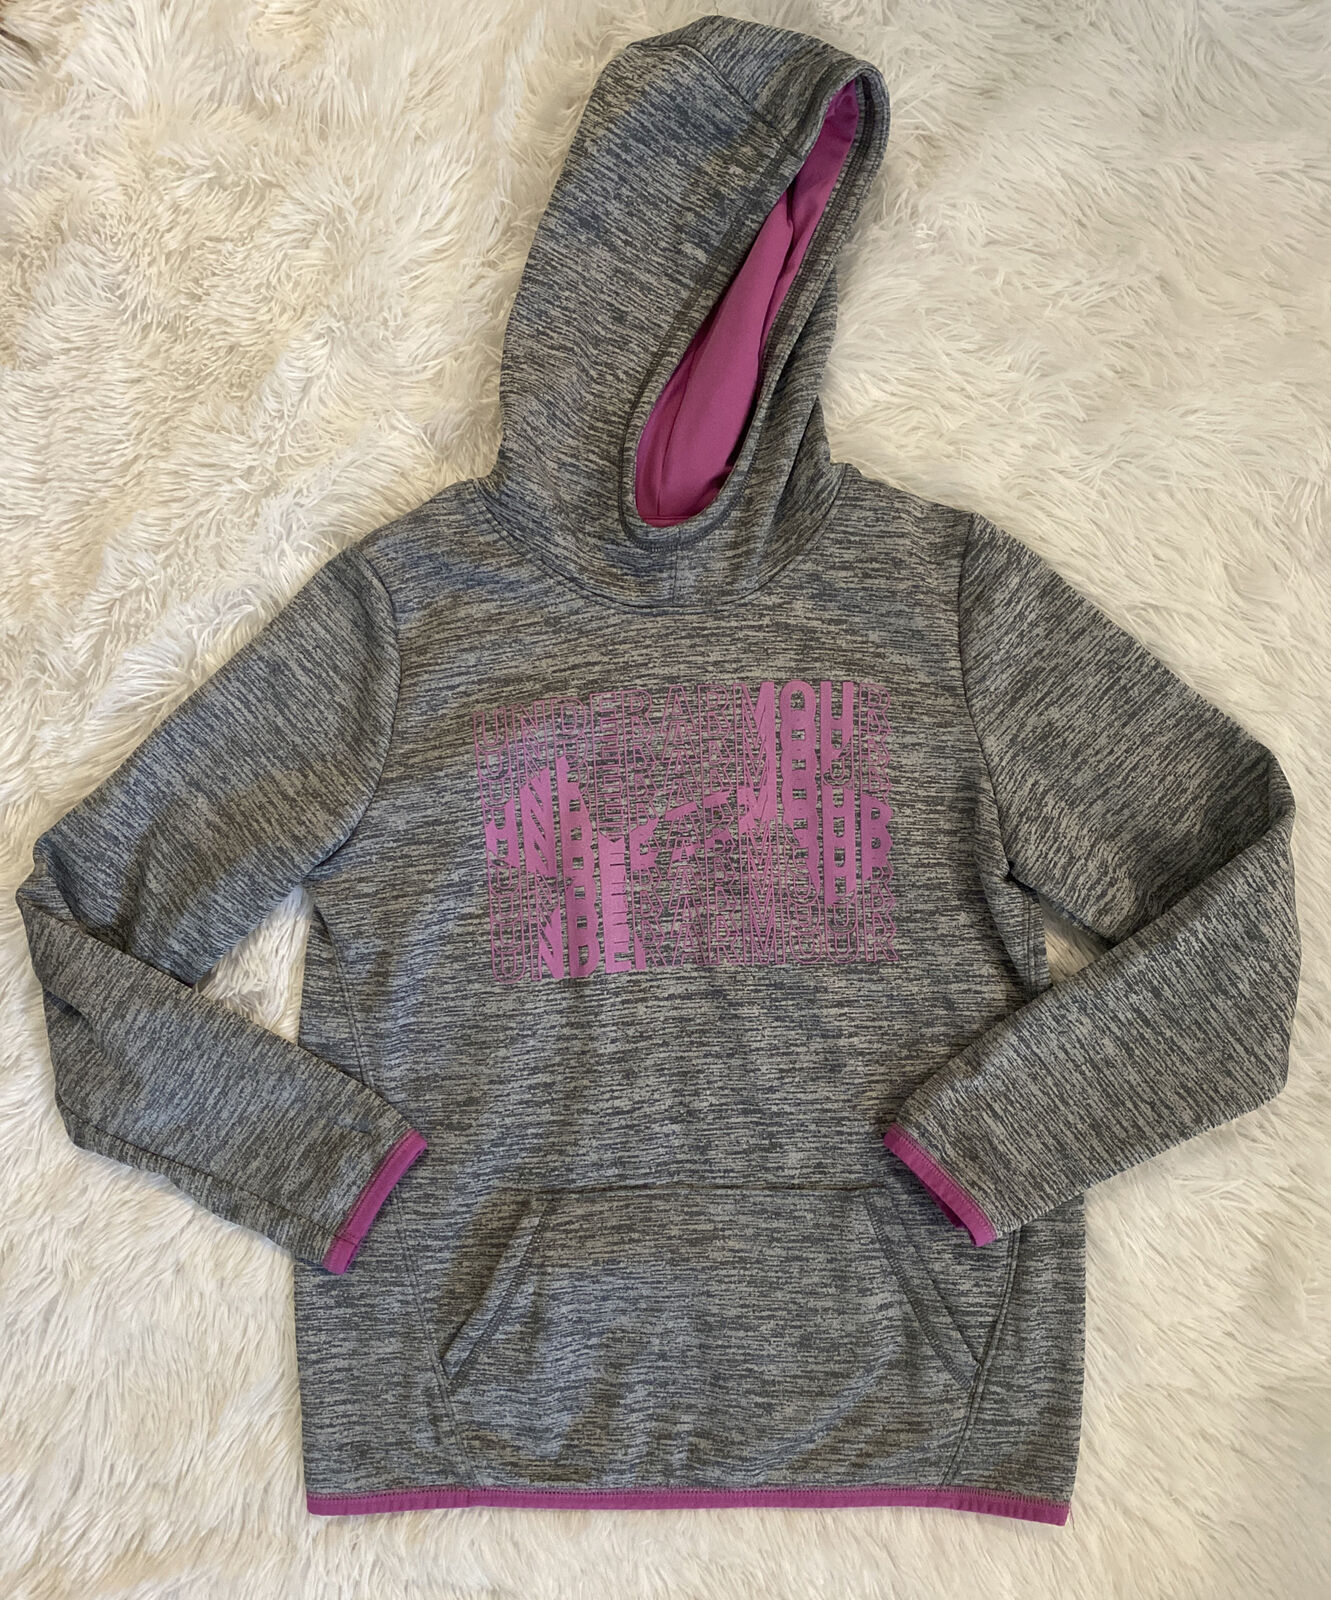 Under Armour Loose Coldgear Purple Gray Hoodie Youth Girls Size Yxl